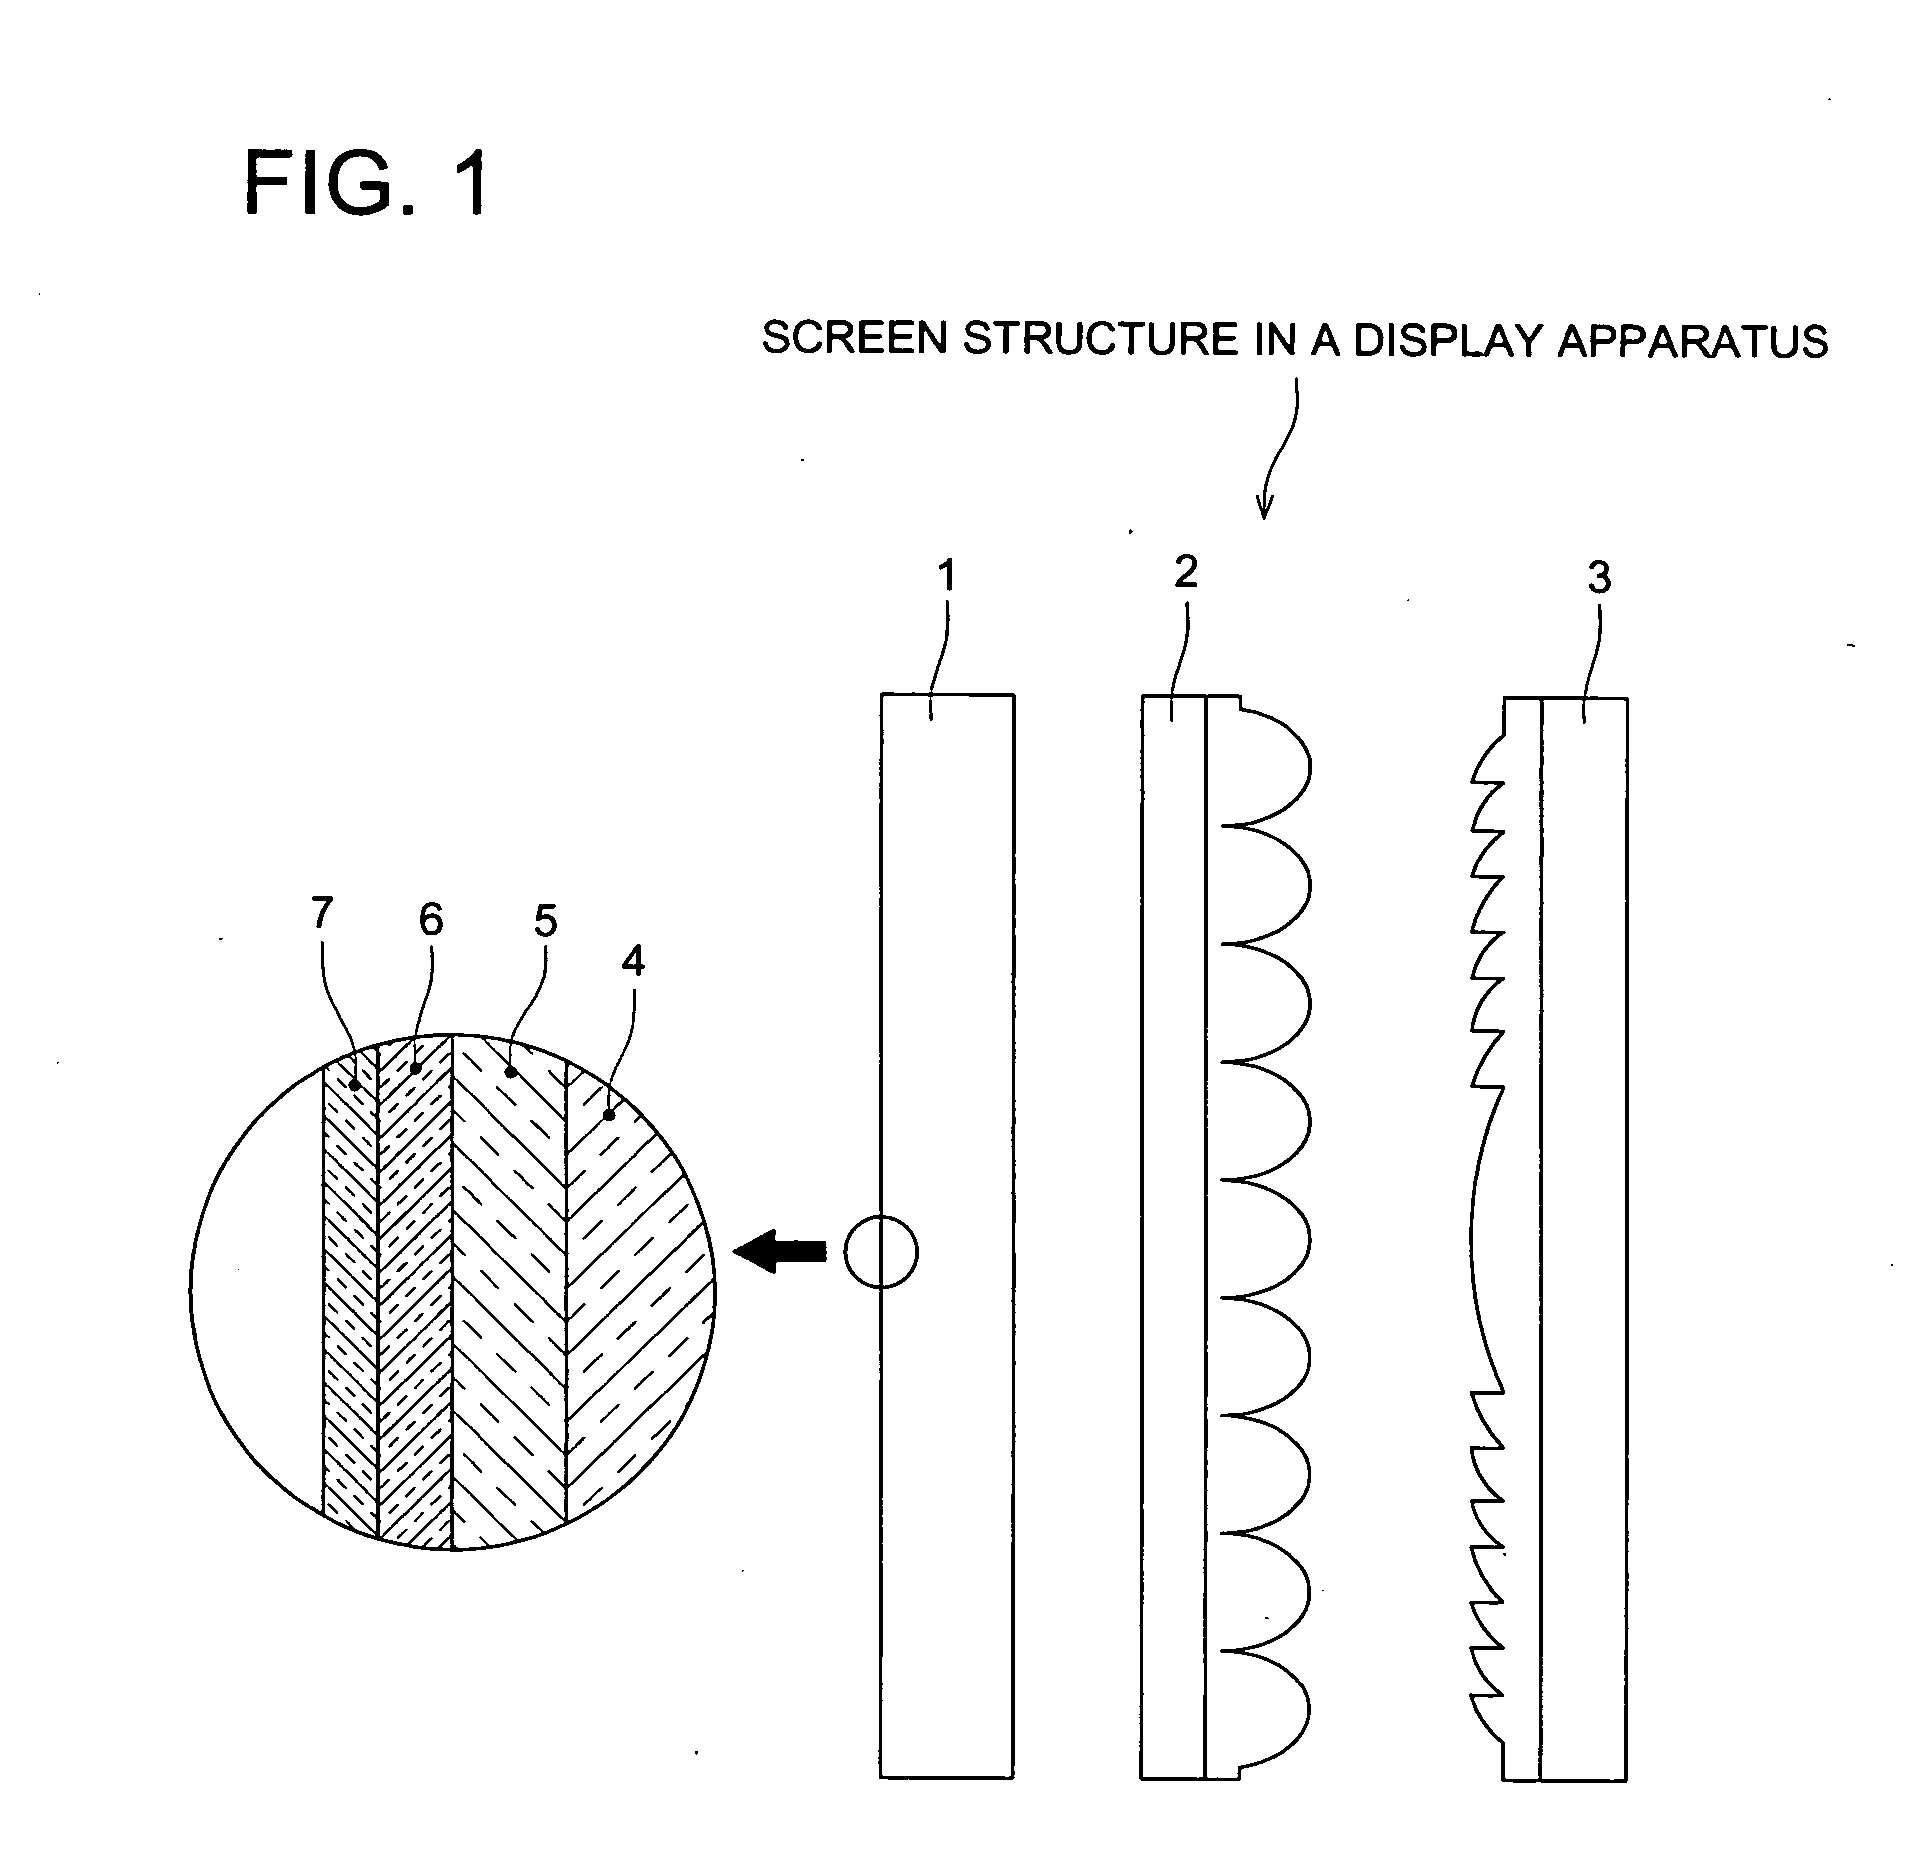 Display front plane, display linticular lens, and display fresnel lens